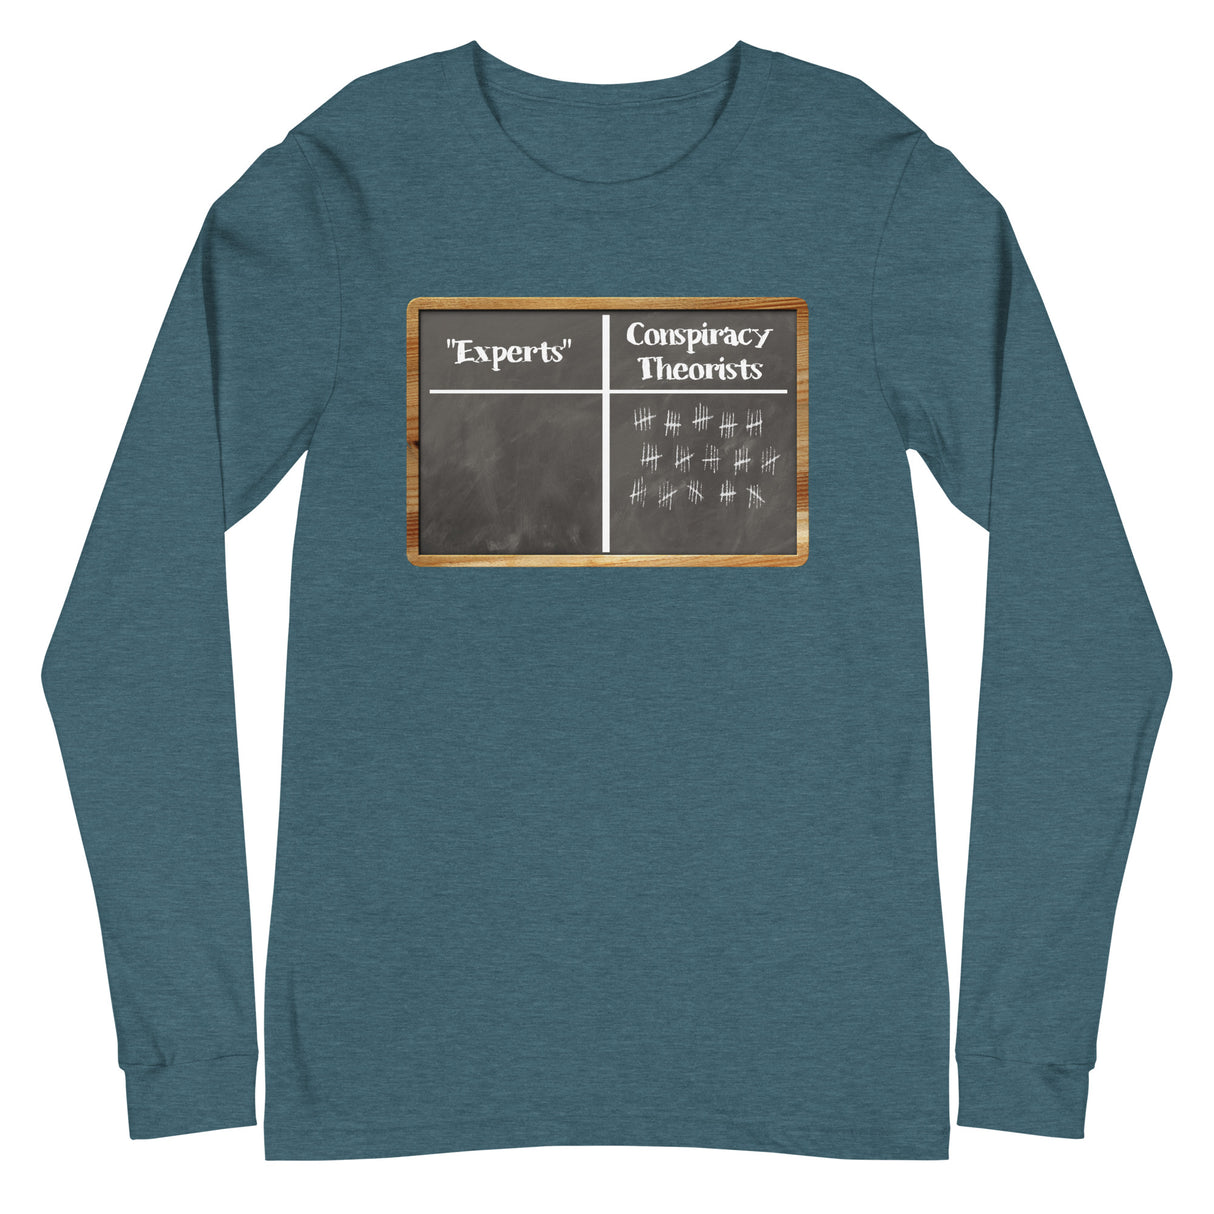 Experts Vs Conspiracy Theorists Long Sleeve Shirt by Libertarian Country